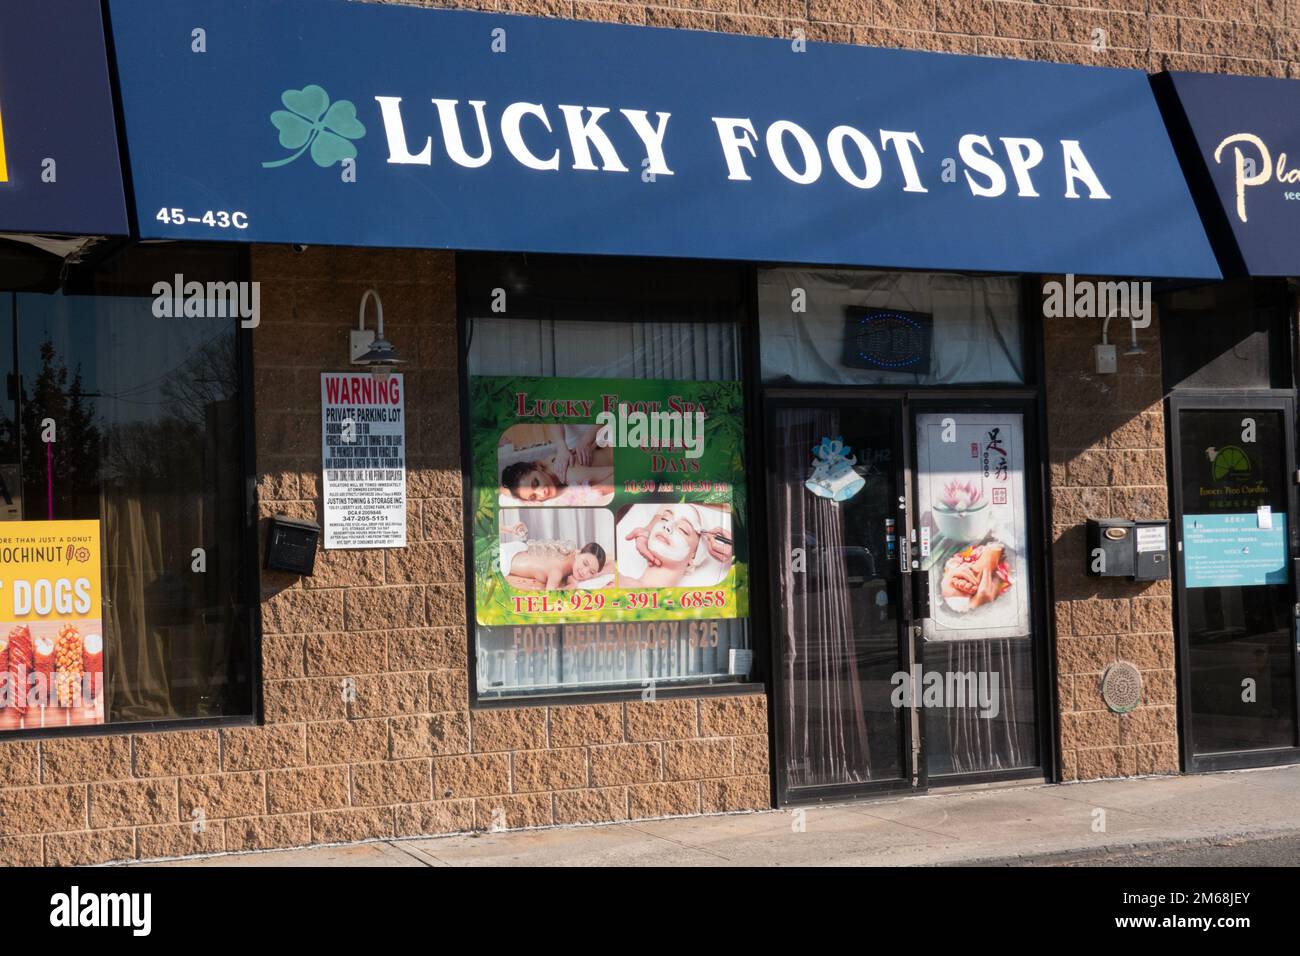 The exterior of Lucky Foot Spa on Bell Boulevard in Bayside, Queens where foot & whole body massages and reflexology are done. Stock Photo